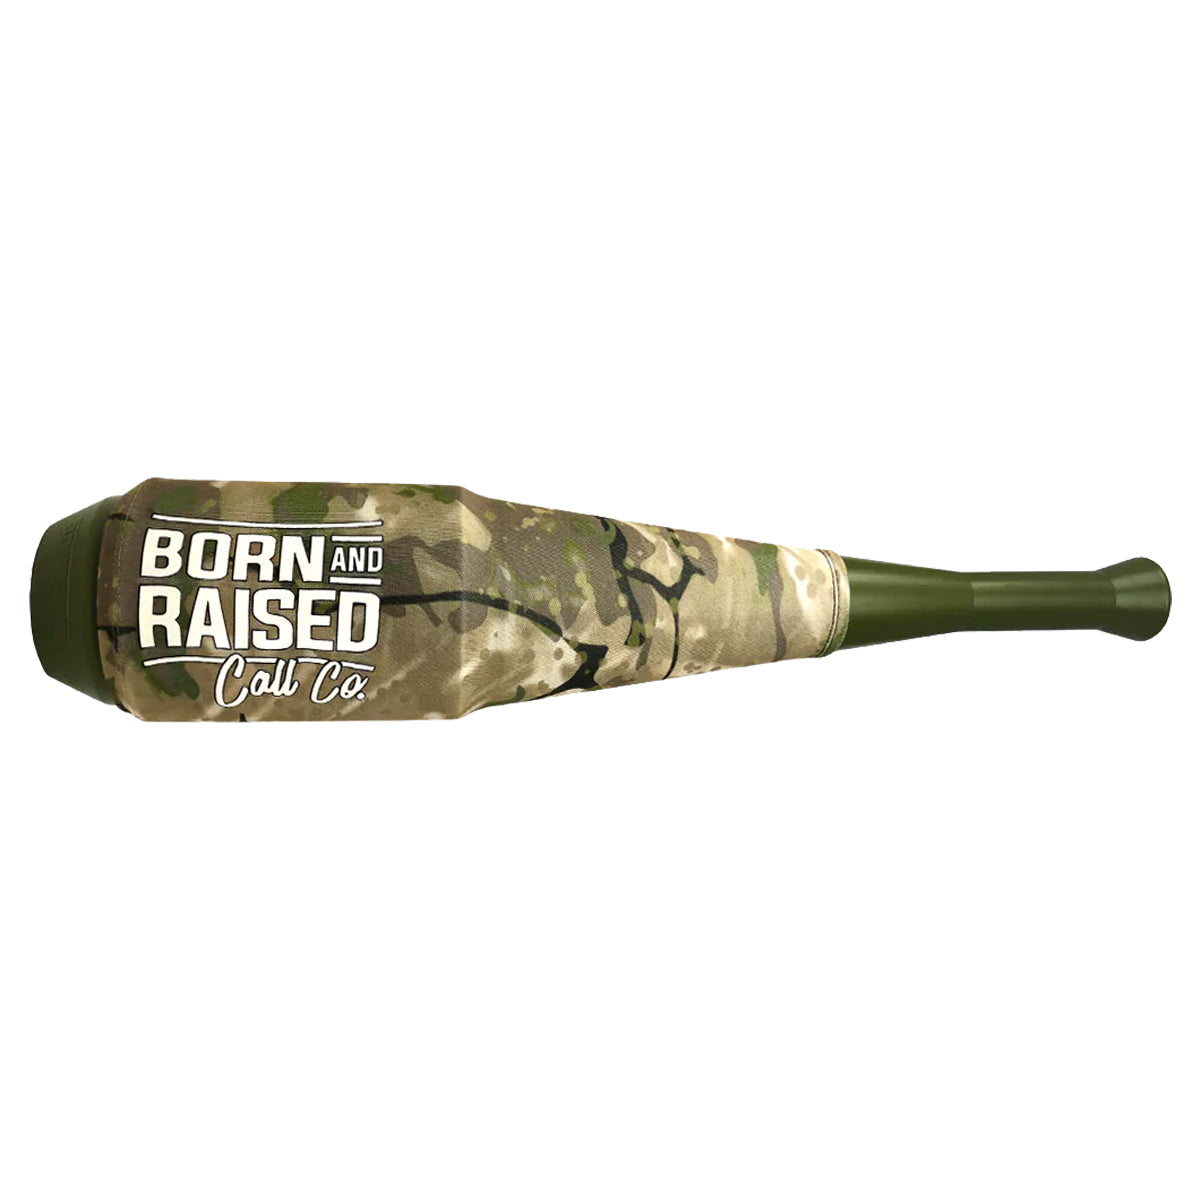 Born and Raised Call Co. The Bomb in Camo by GOHUNT | Born and Raised Call Co. - GOHUNT Shop